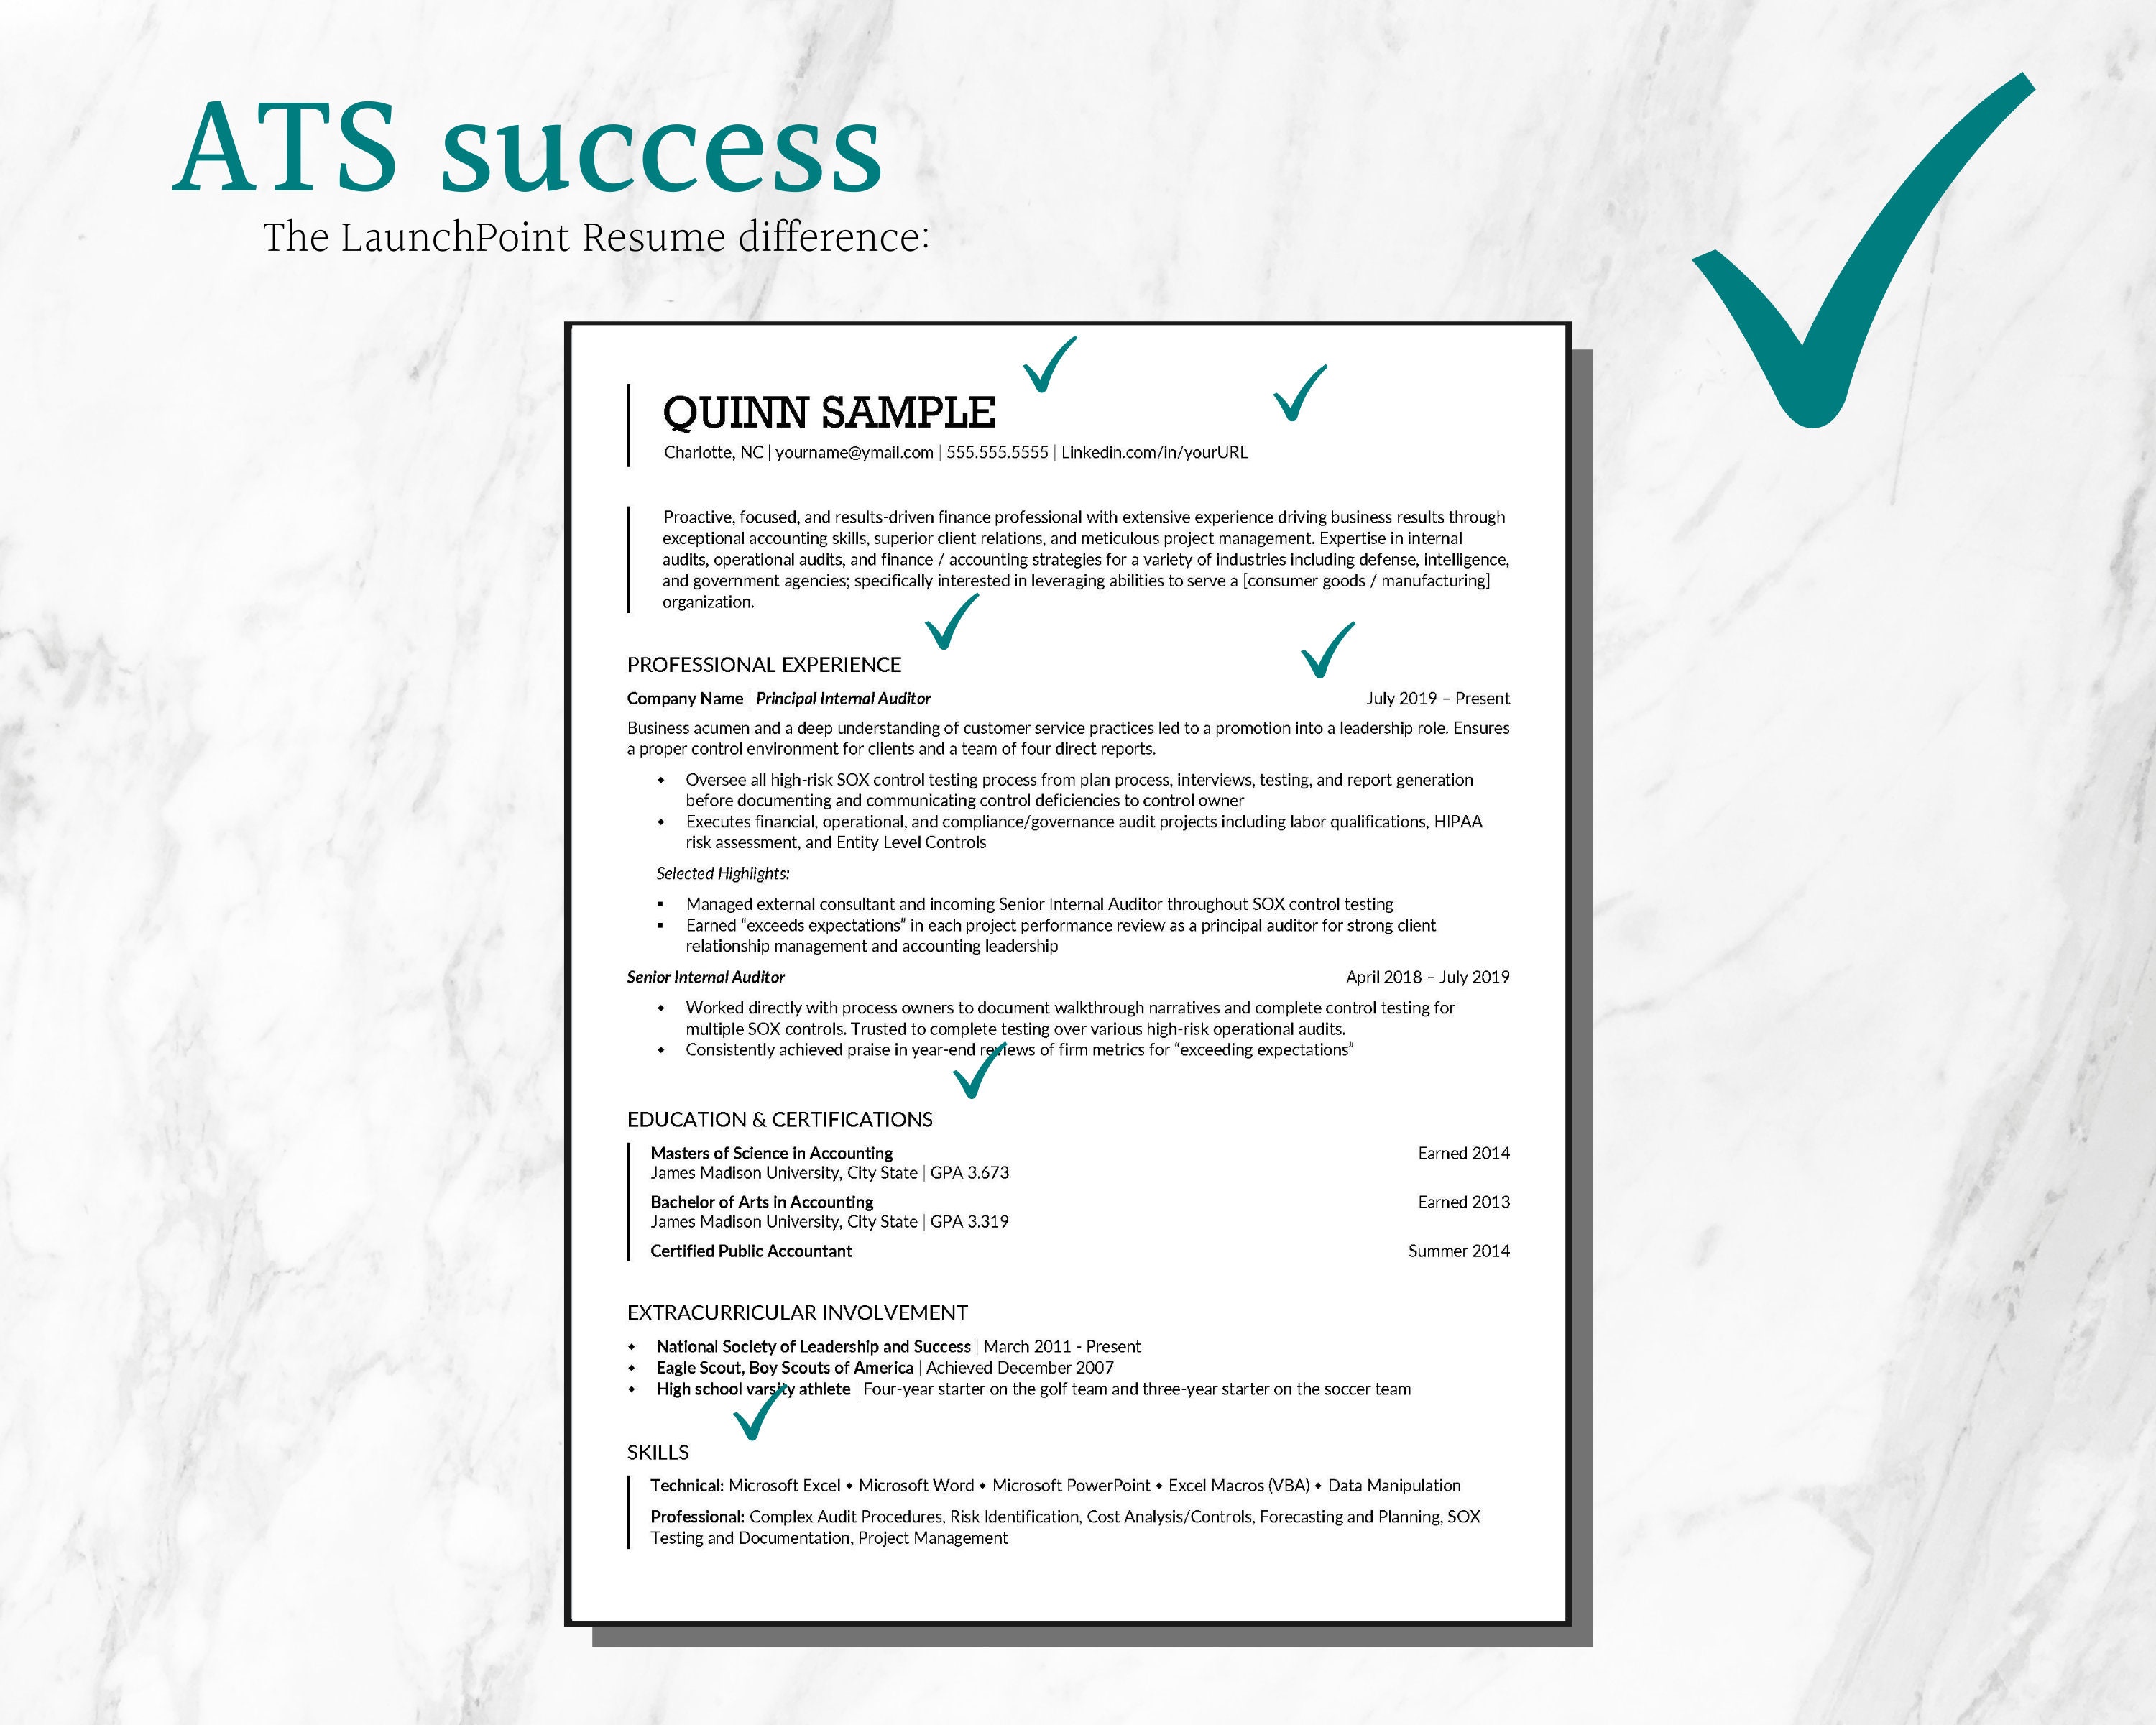 ats resume template 2017 free download